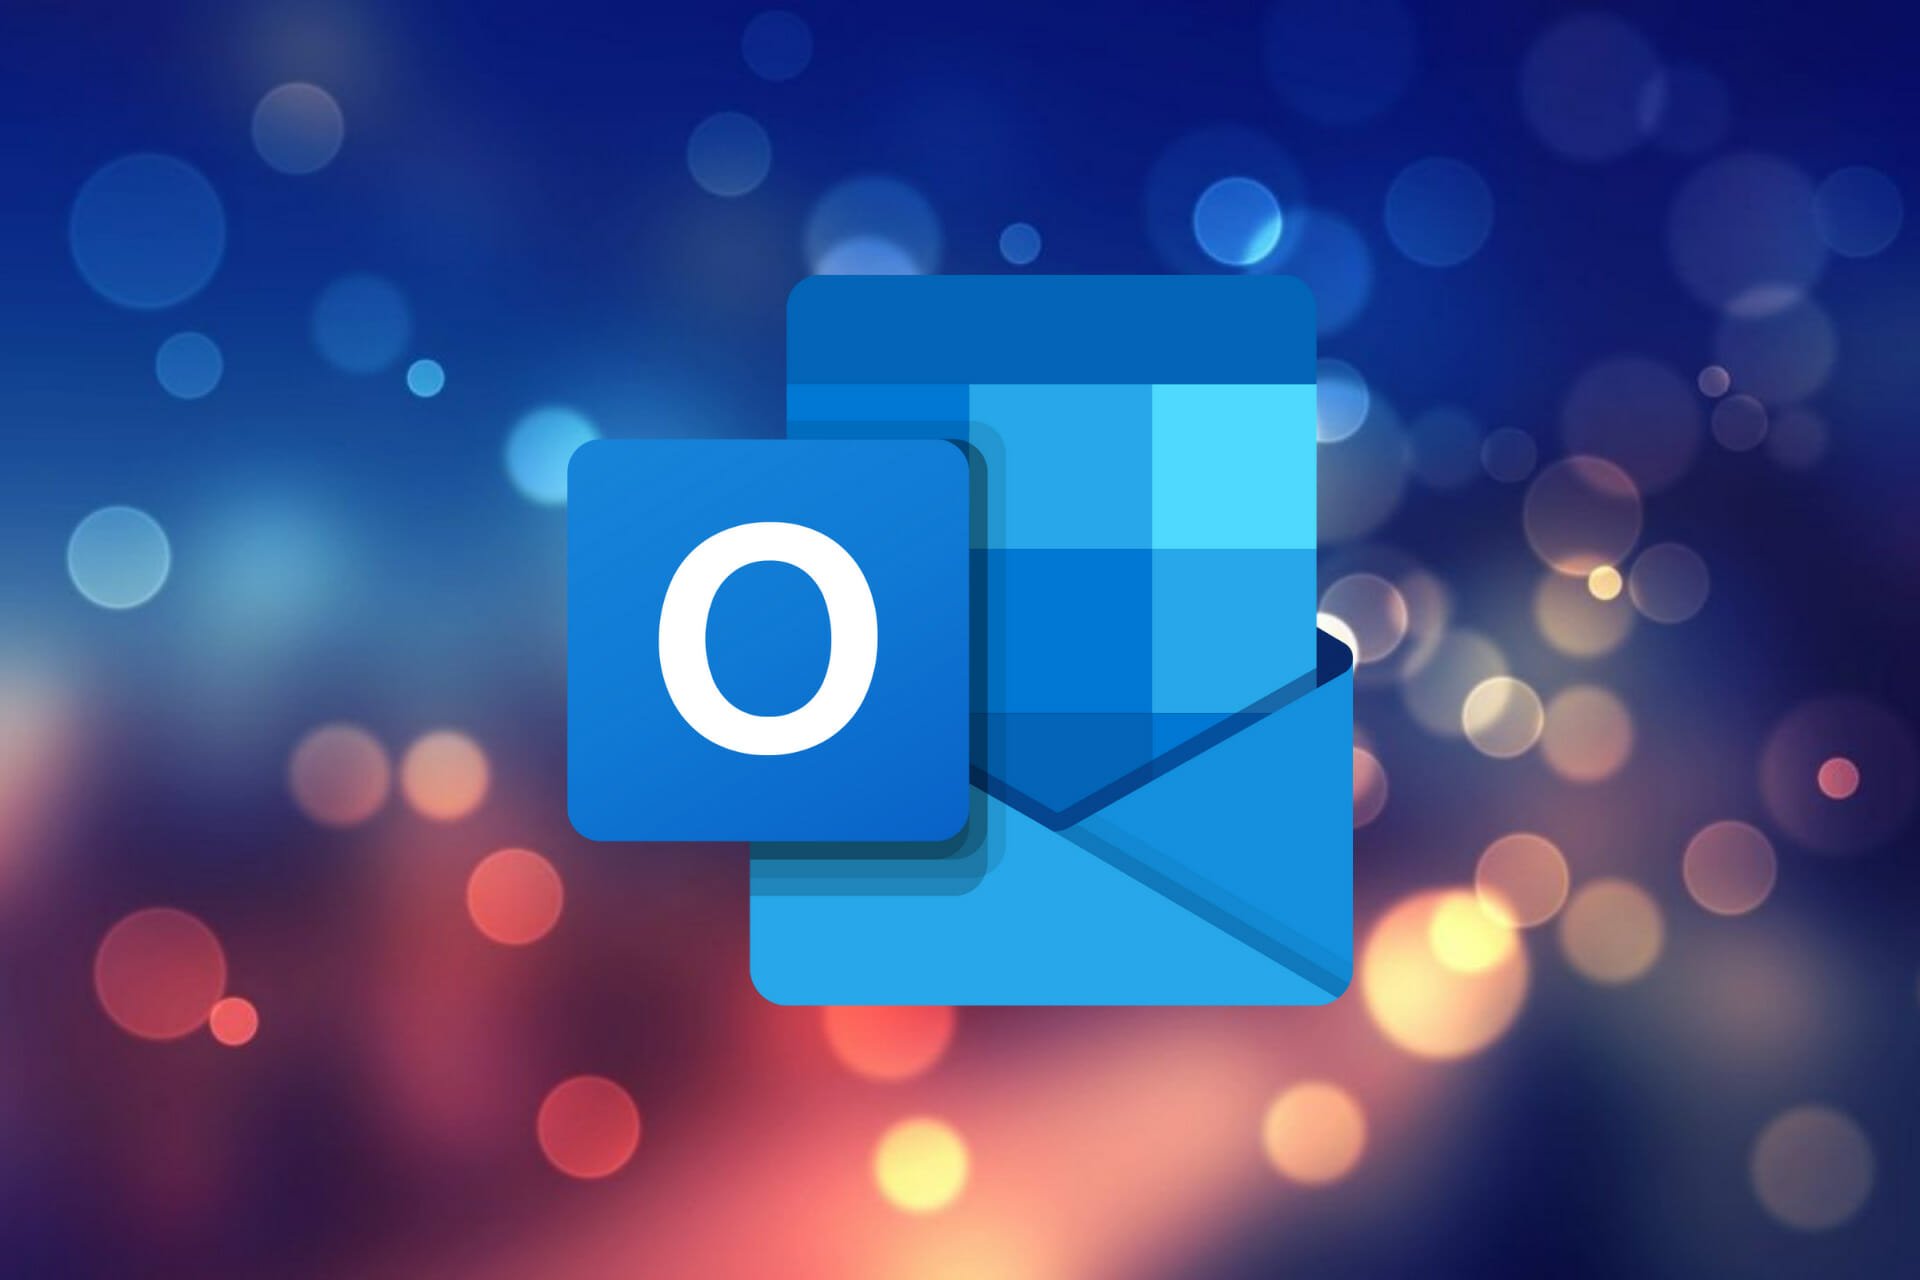 Microsoft outlook featured